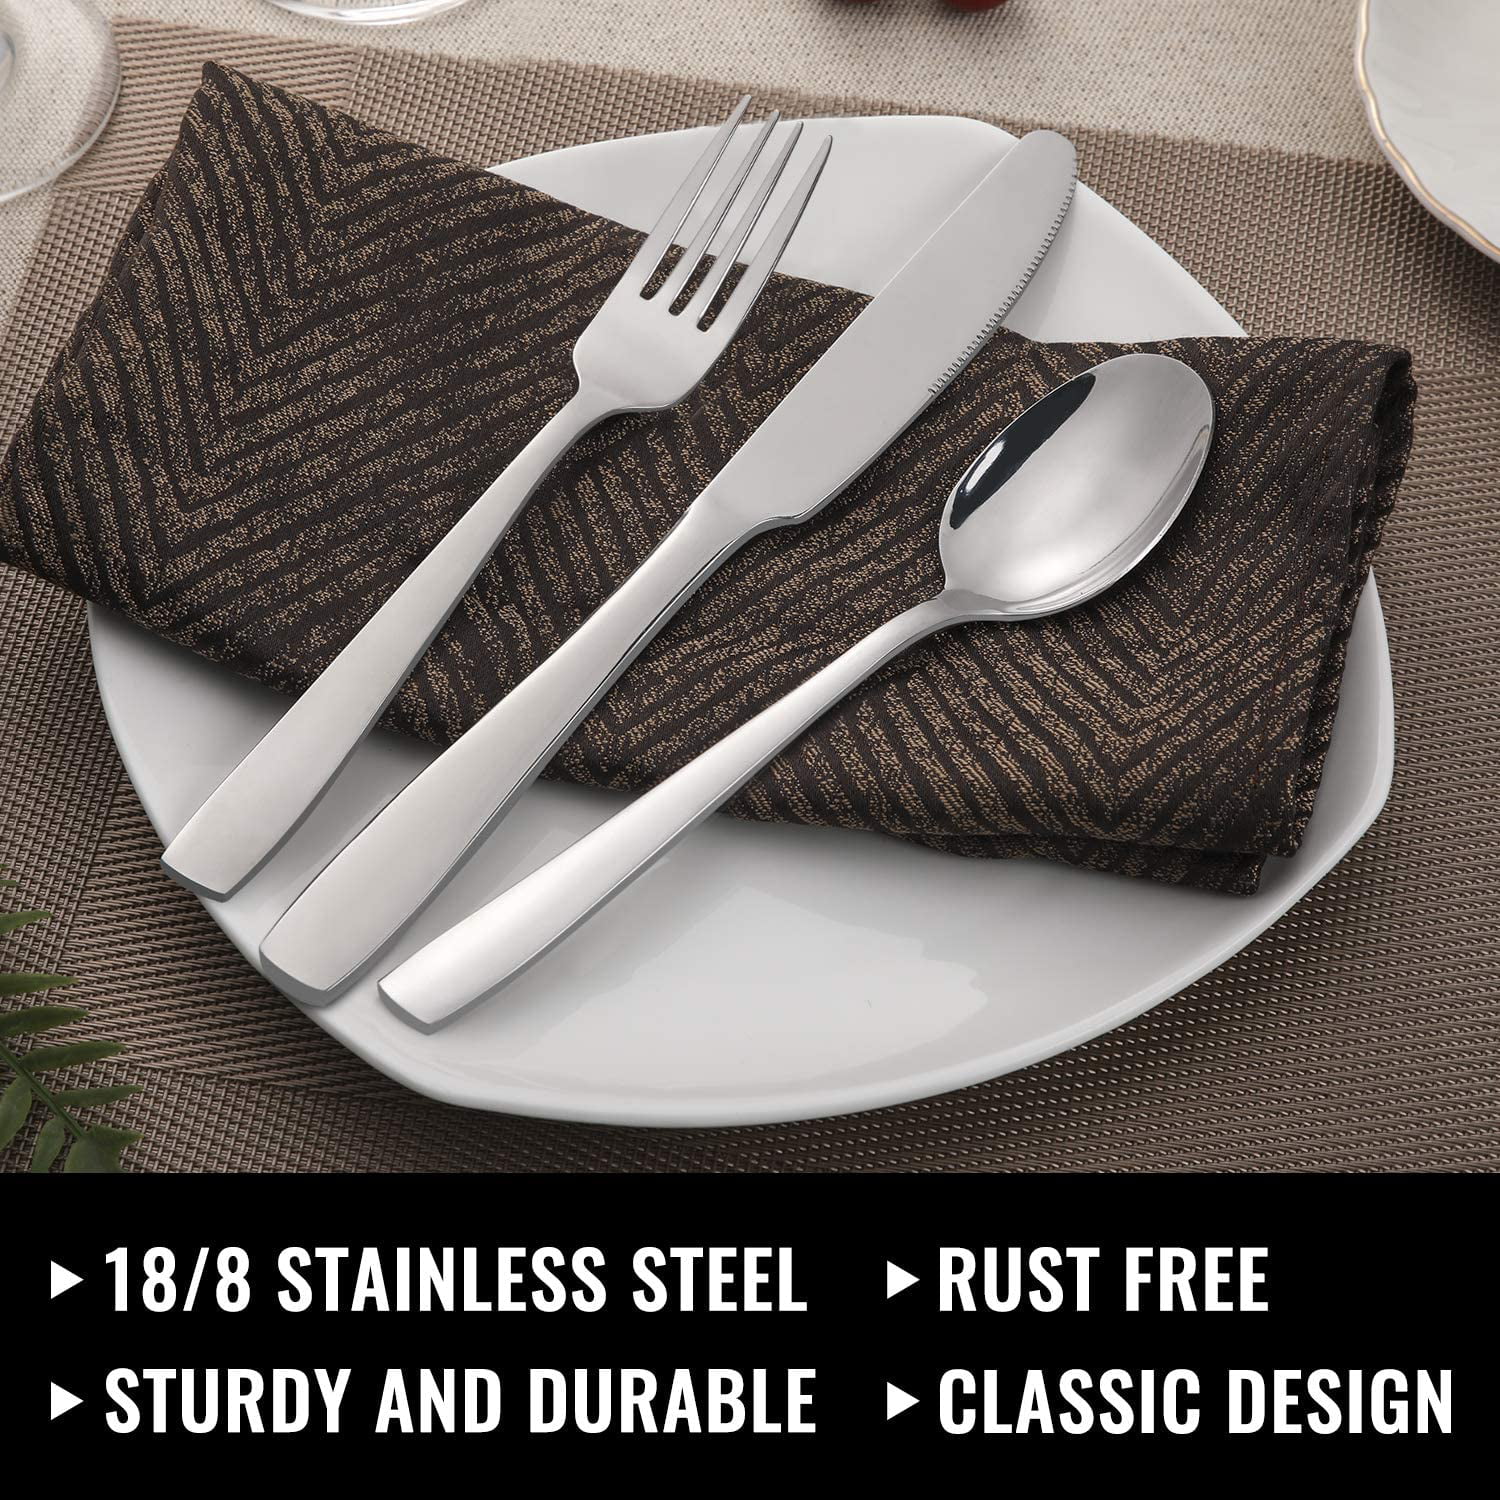 48 Pcs Silverware Set Stainless Steel Polished Flatware Cutlery Service for 12 